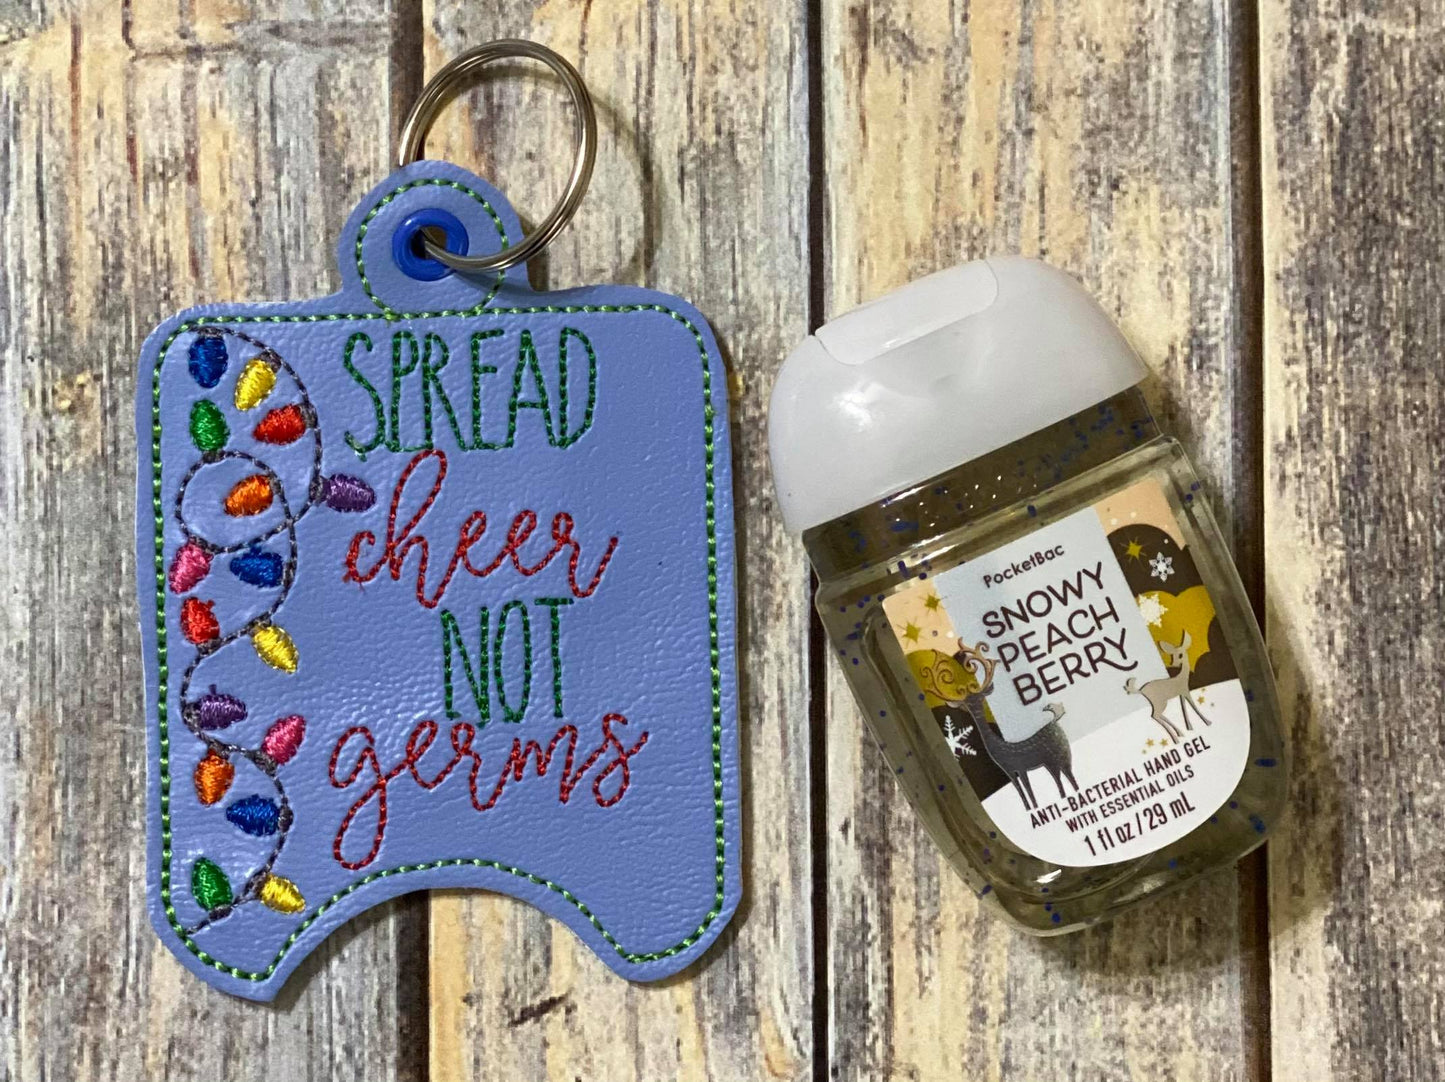 Spread Cheer Not Germs Sanitizer Holders - DIGITAL Embroidery DESIGN